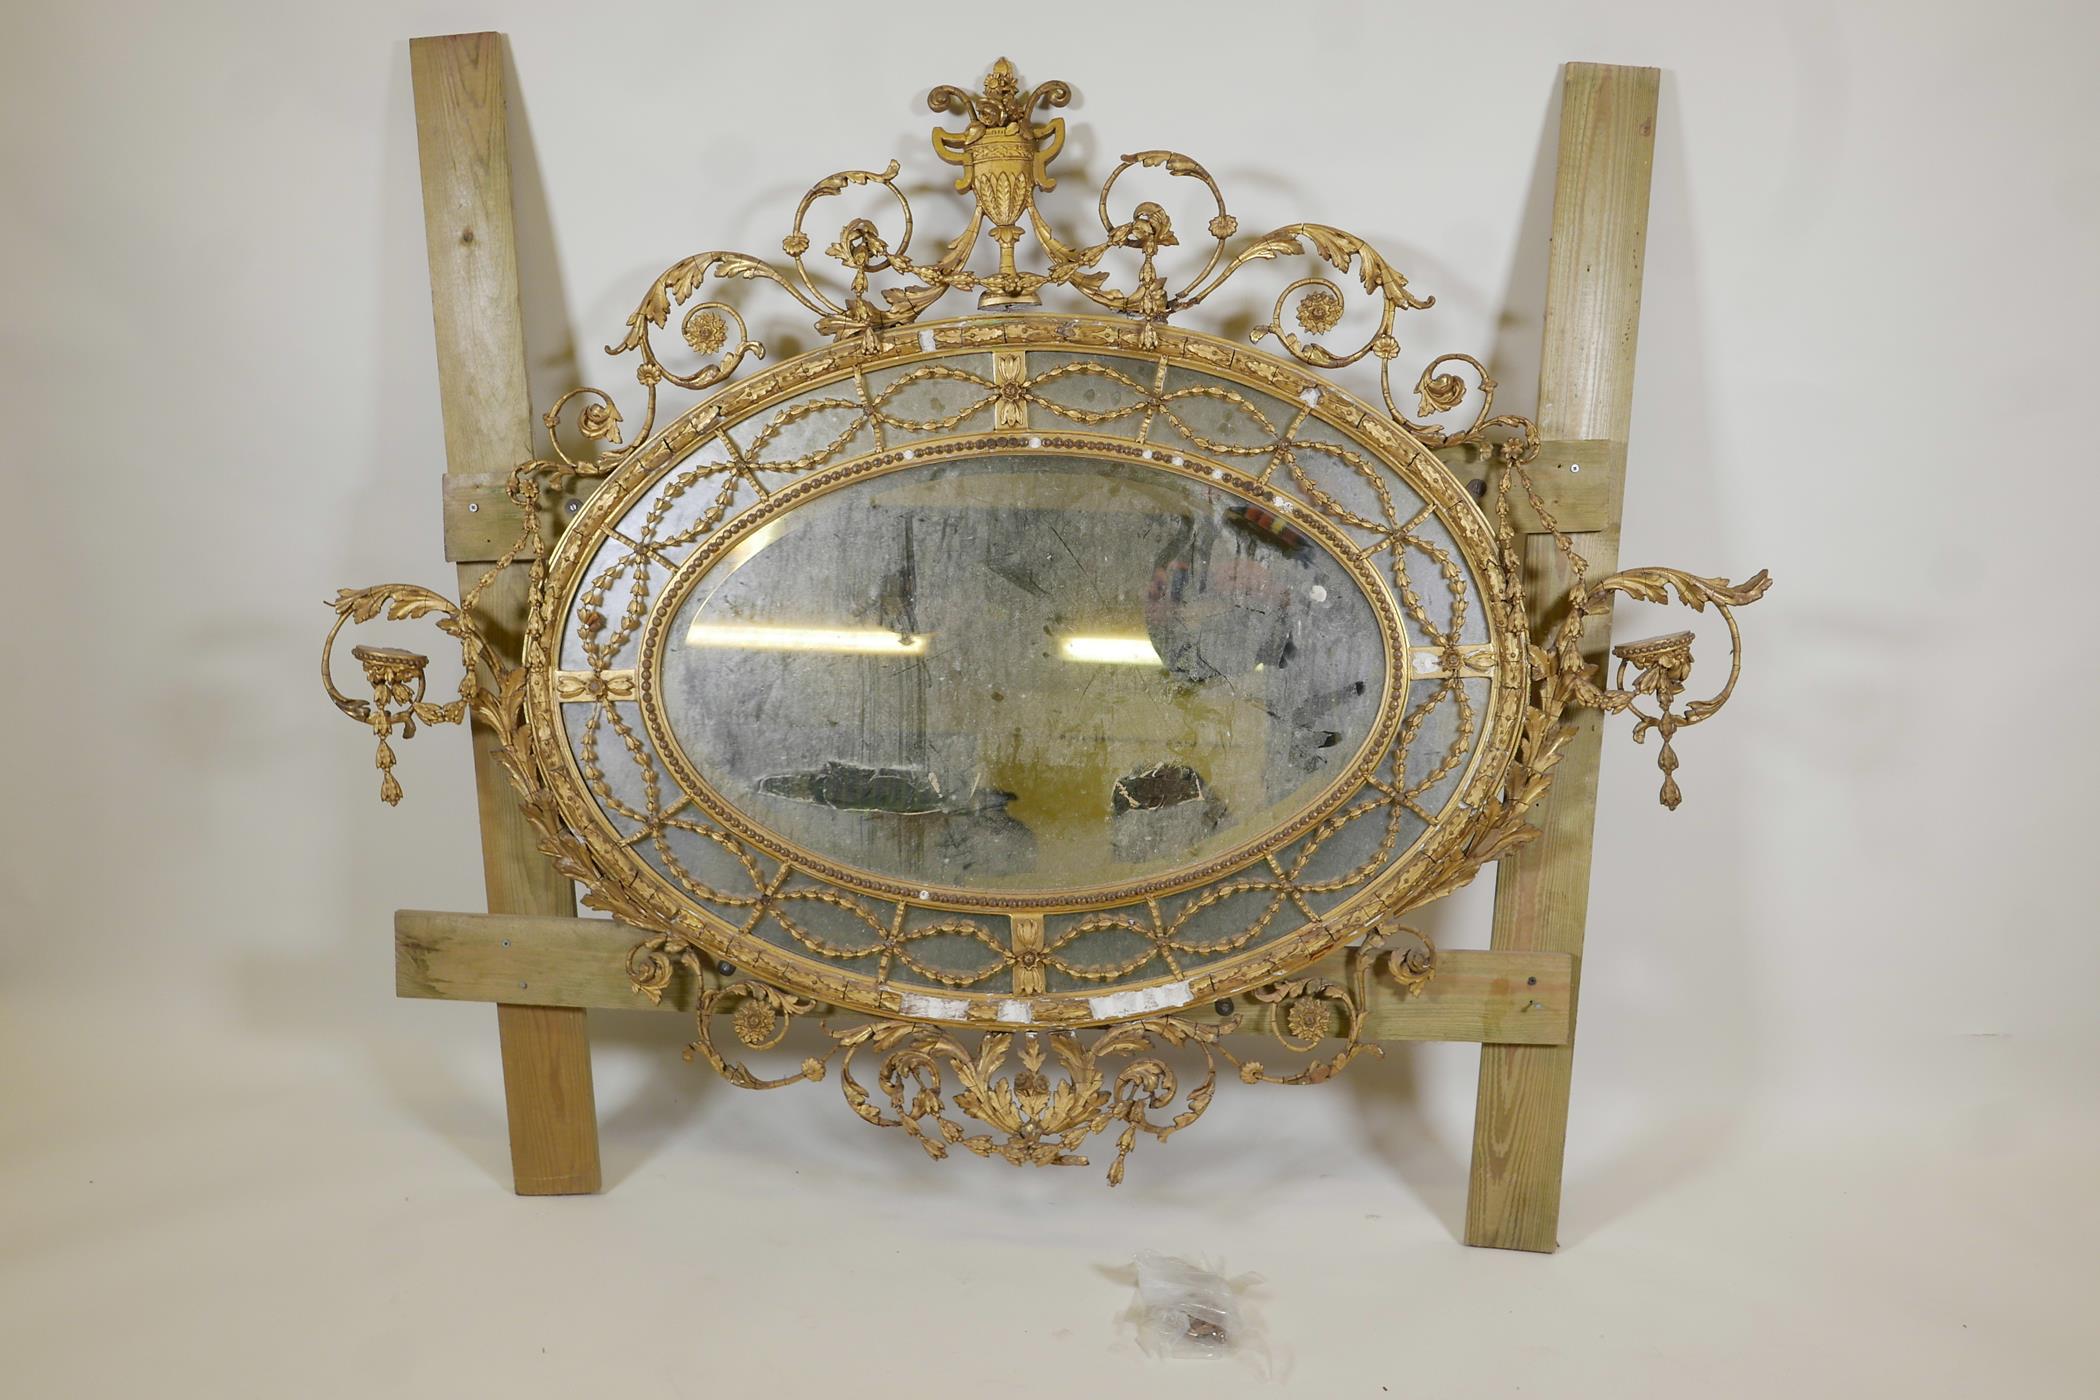 A C19th Adam style giltwood and composition sectional hall mirror, A/F, 60" x 46" - Image 2 of 7